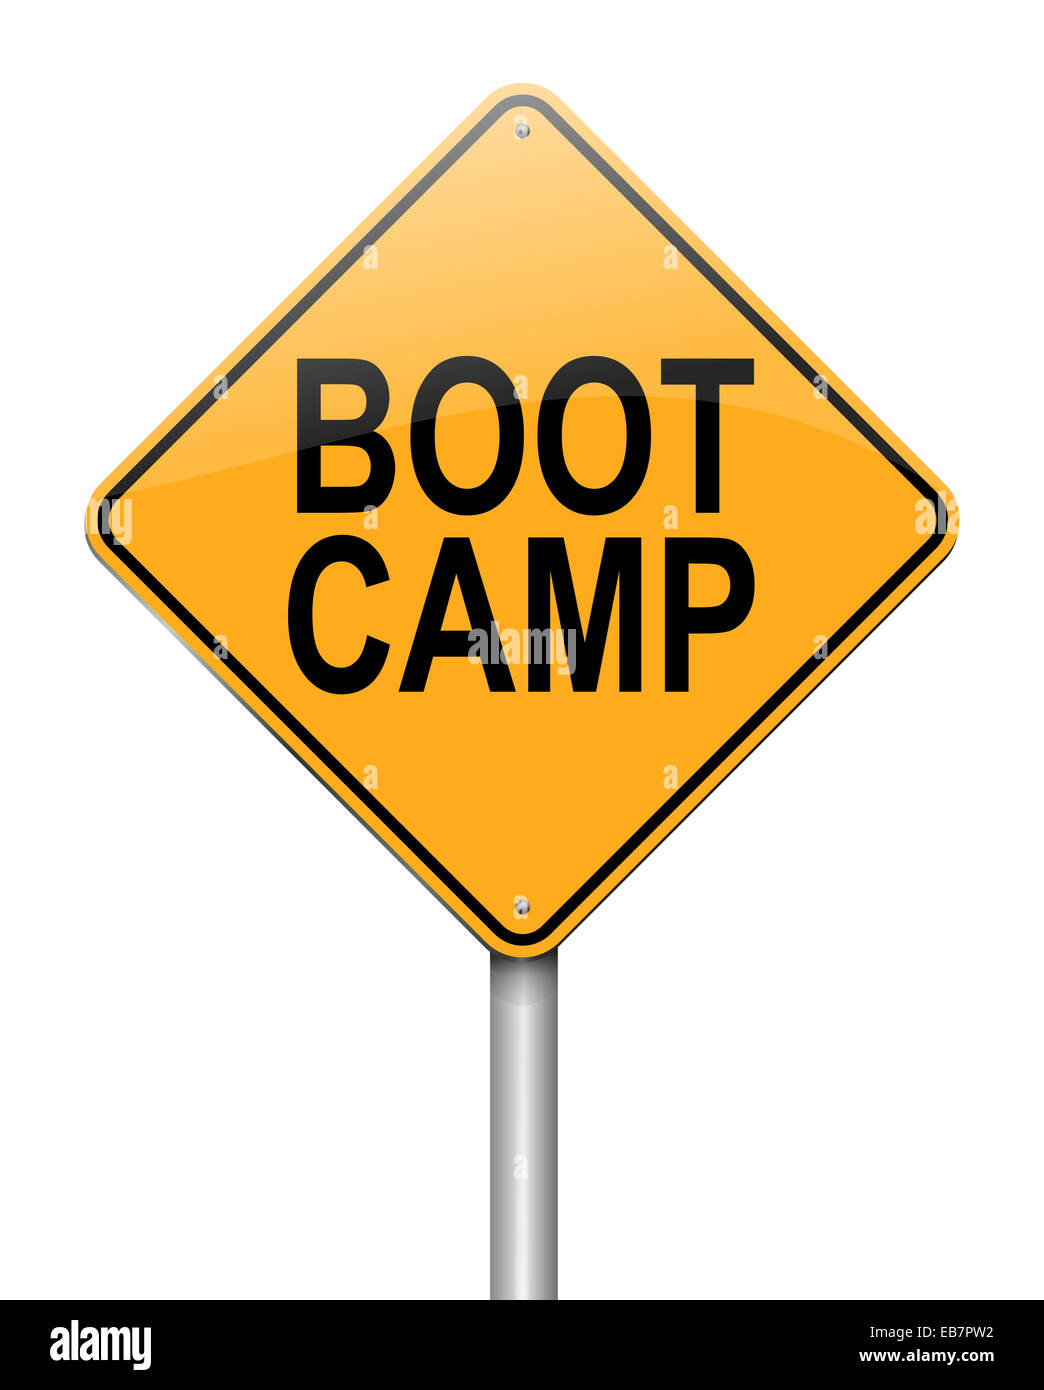 Boot camp concept. Stock Photo